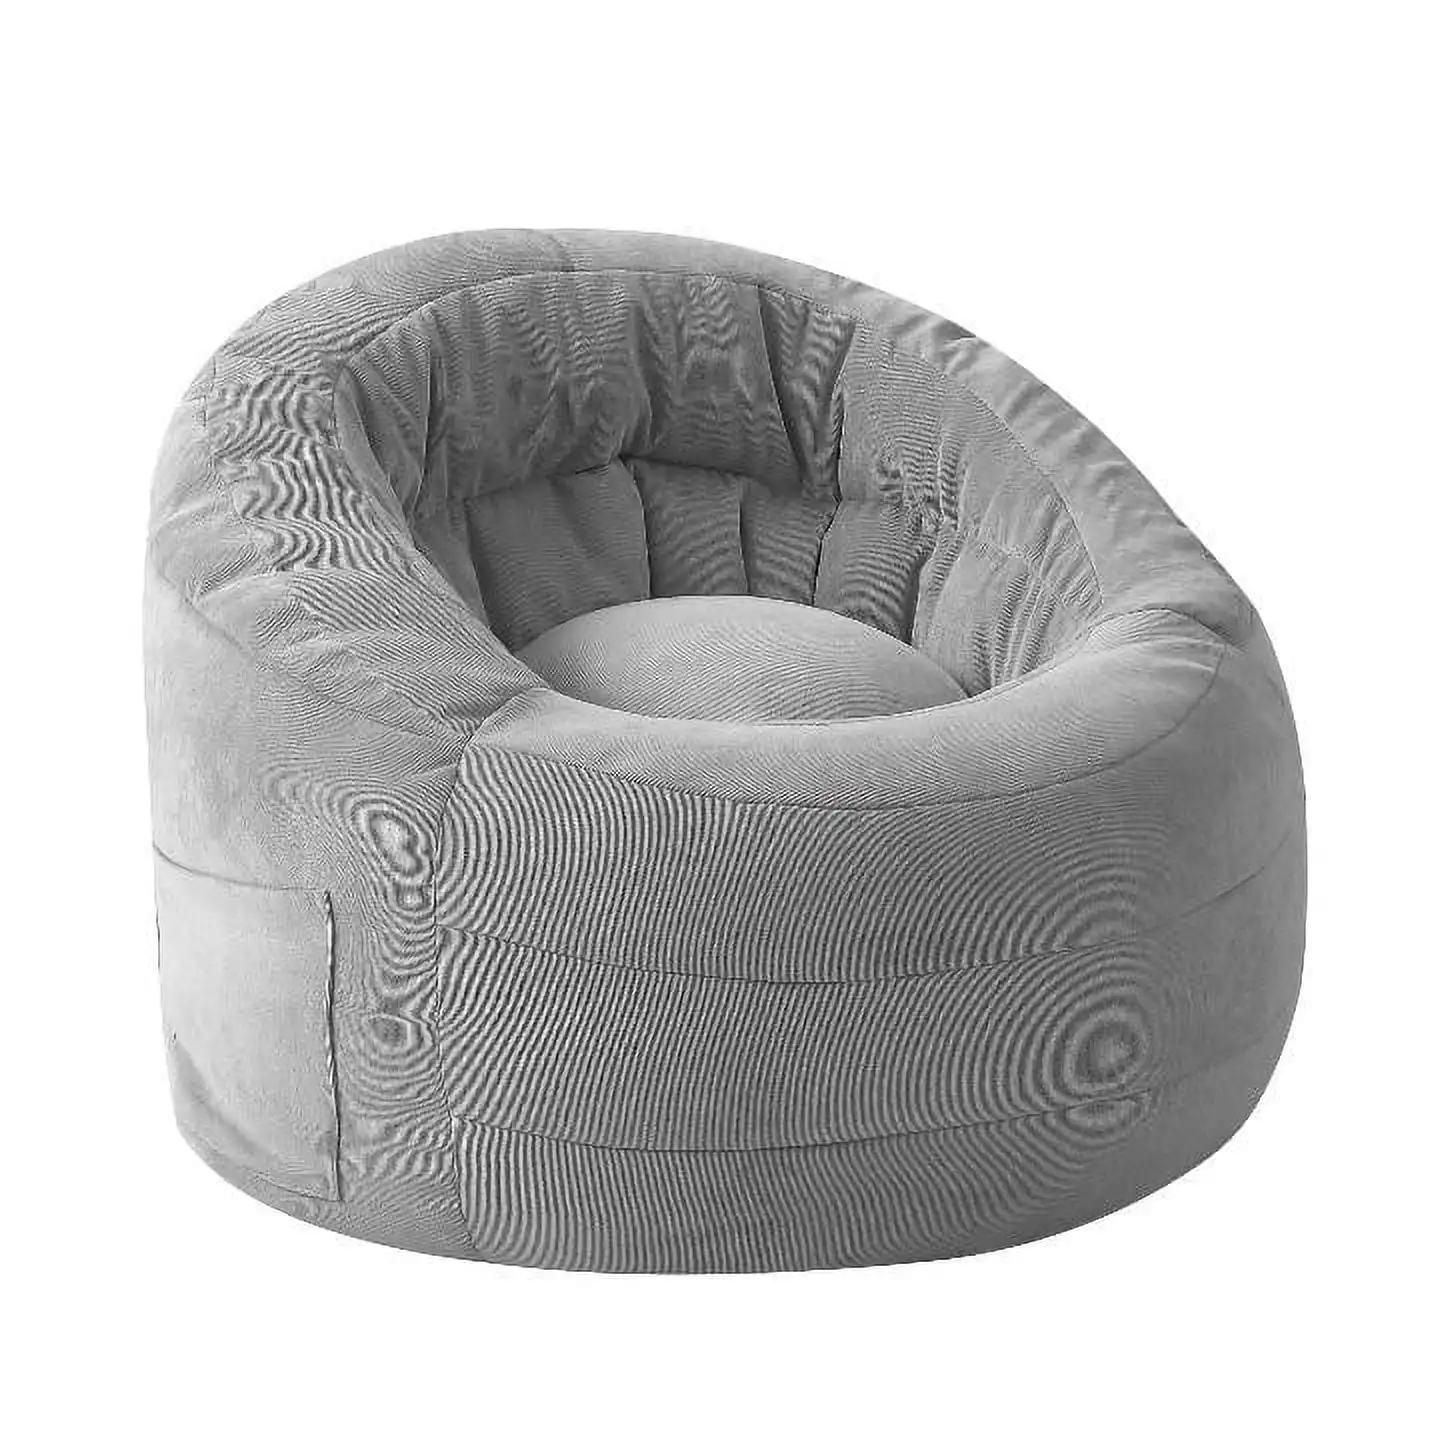 

Soft Plush Corduroy Bean Bag Chair with Pocket Furniture Bag Sofa Couch for Living Room Bedroom, Grey